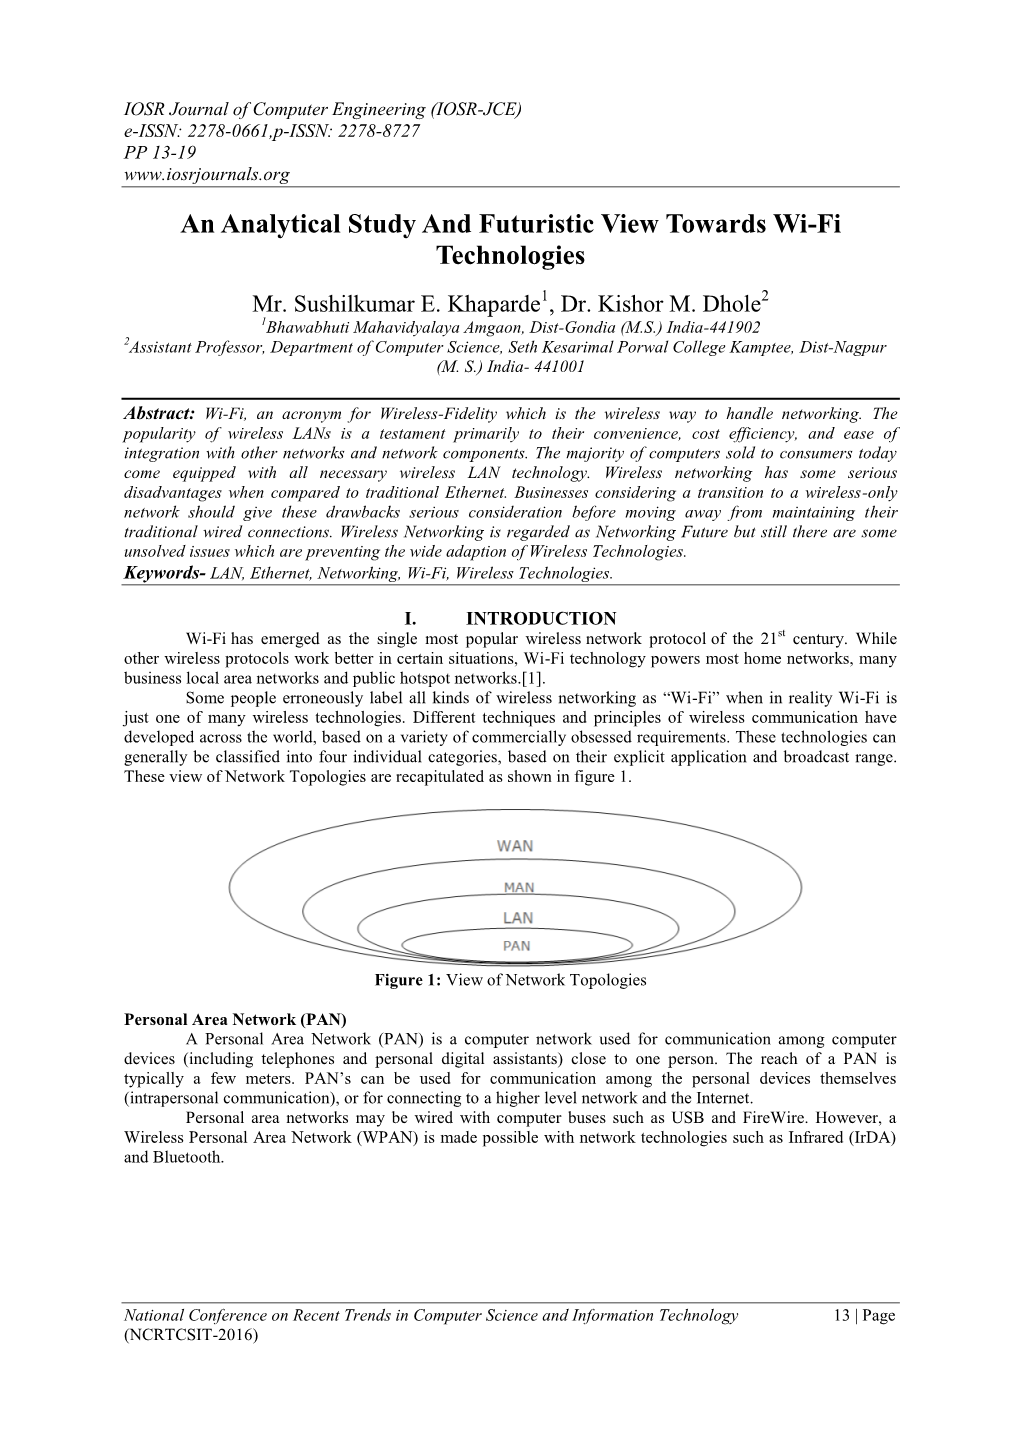 An Analytical Study and Futuristic View Towards Wi-Fi Technologies